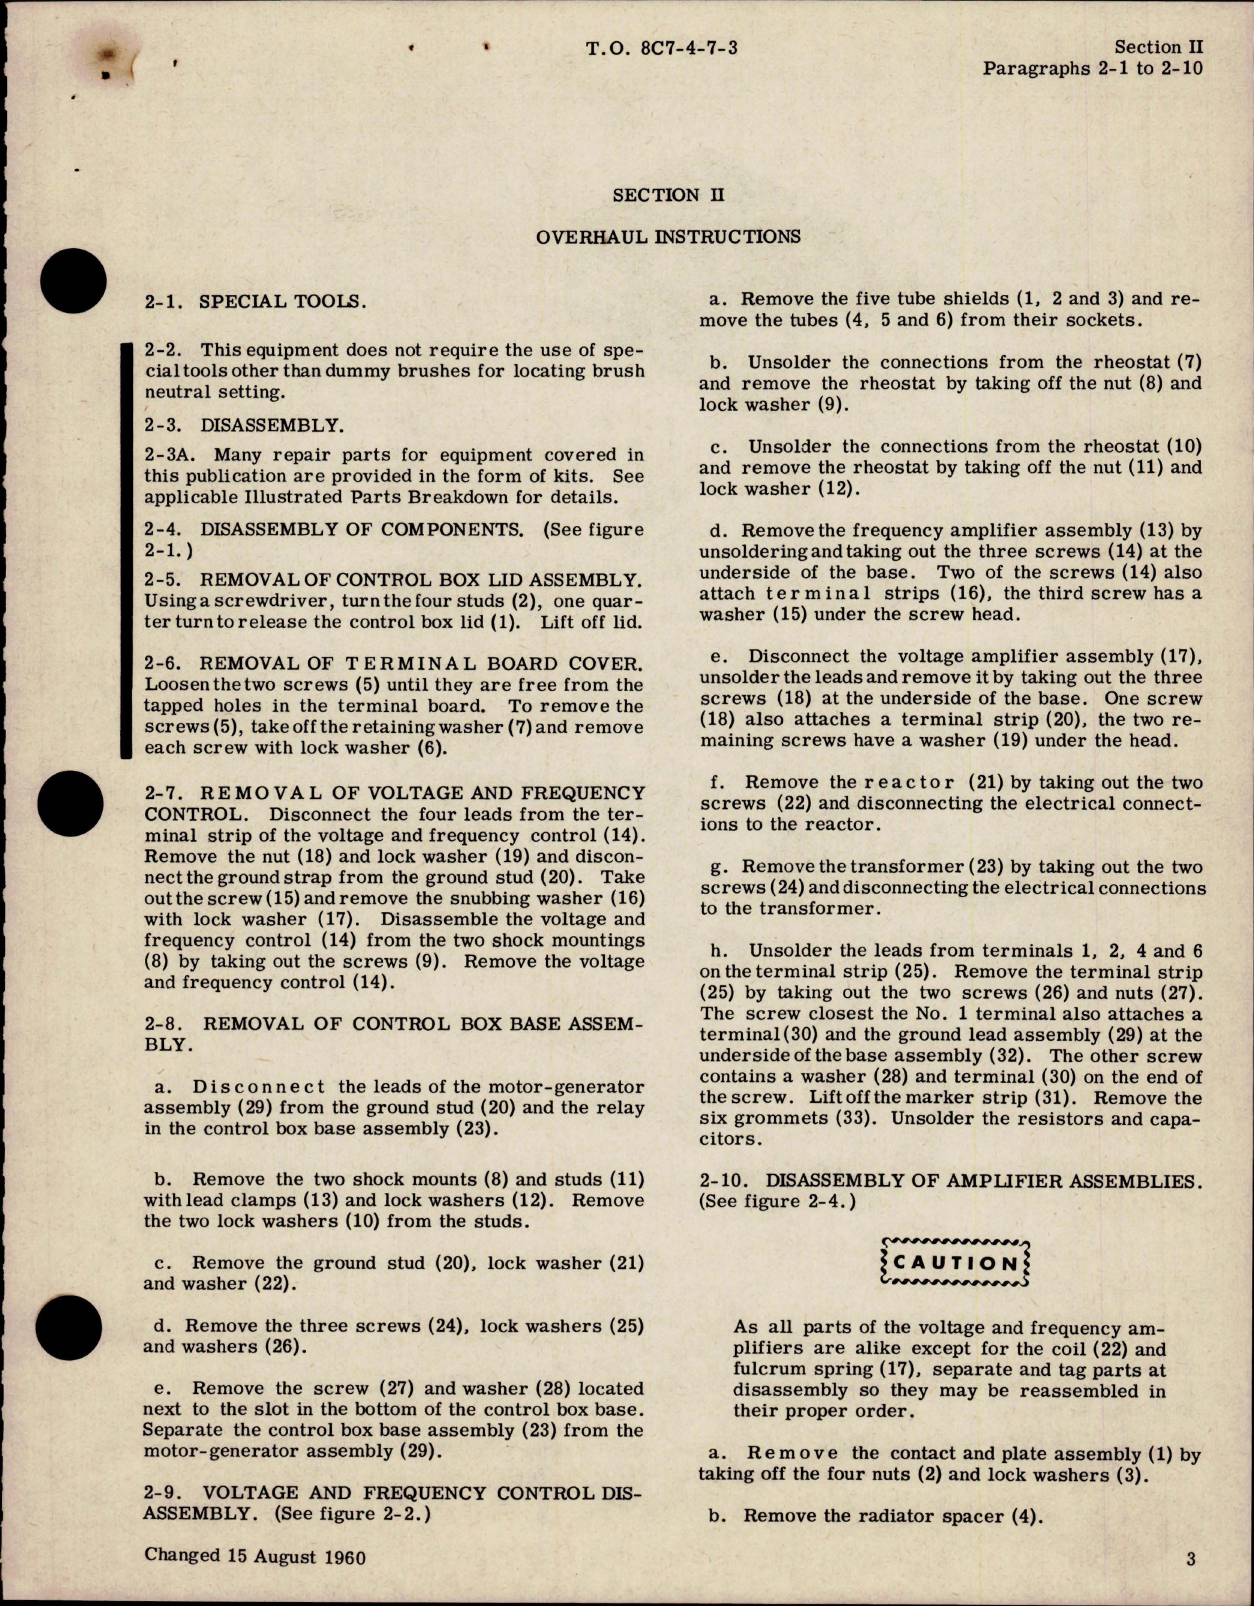 Sample page 7 from AirCorps Library document: Overhaul Instructions for Inverter AN 3514-1 - Parts SE-6-1, SE-6-1A, SE-6-2 and SE-6-2A 